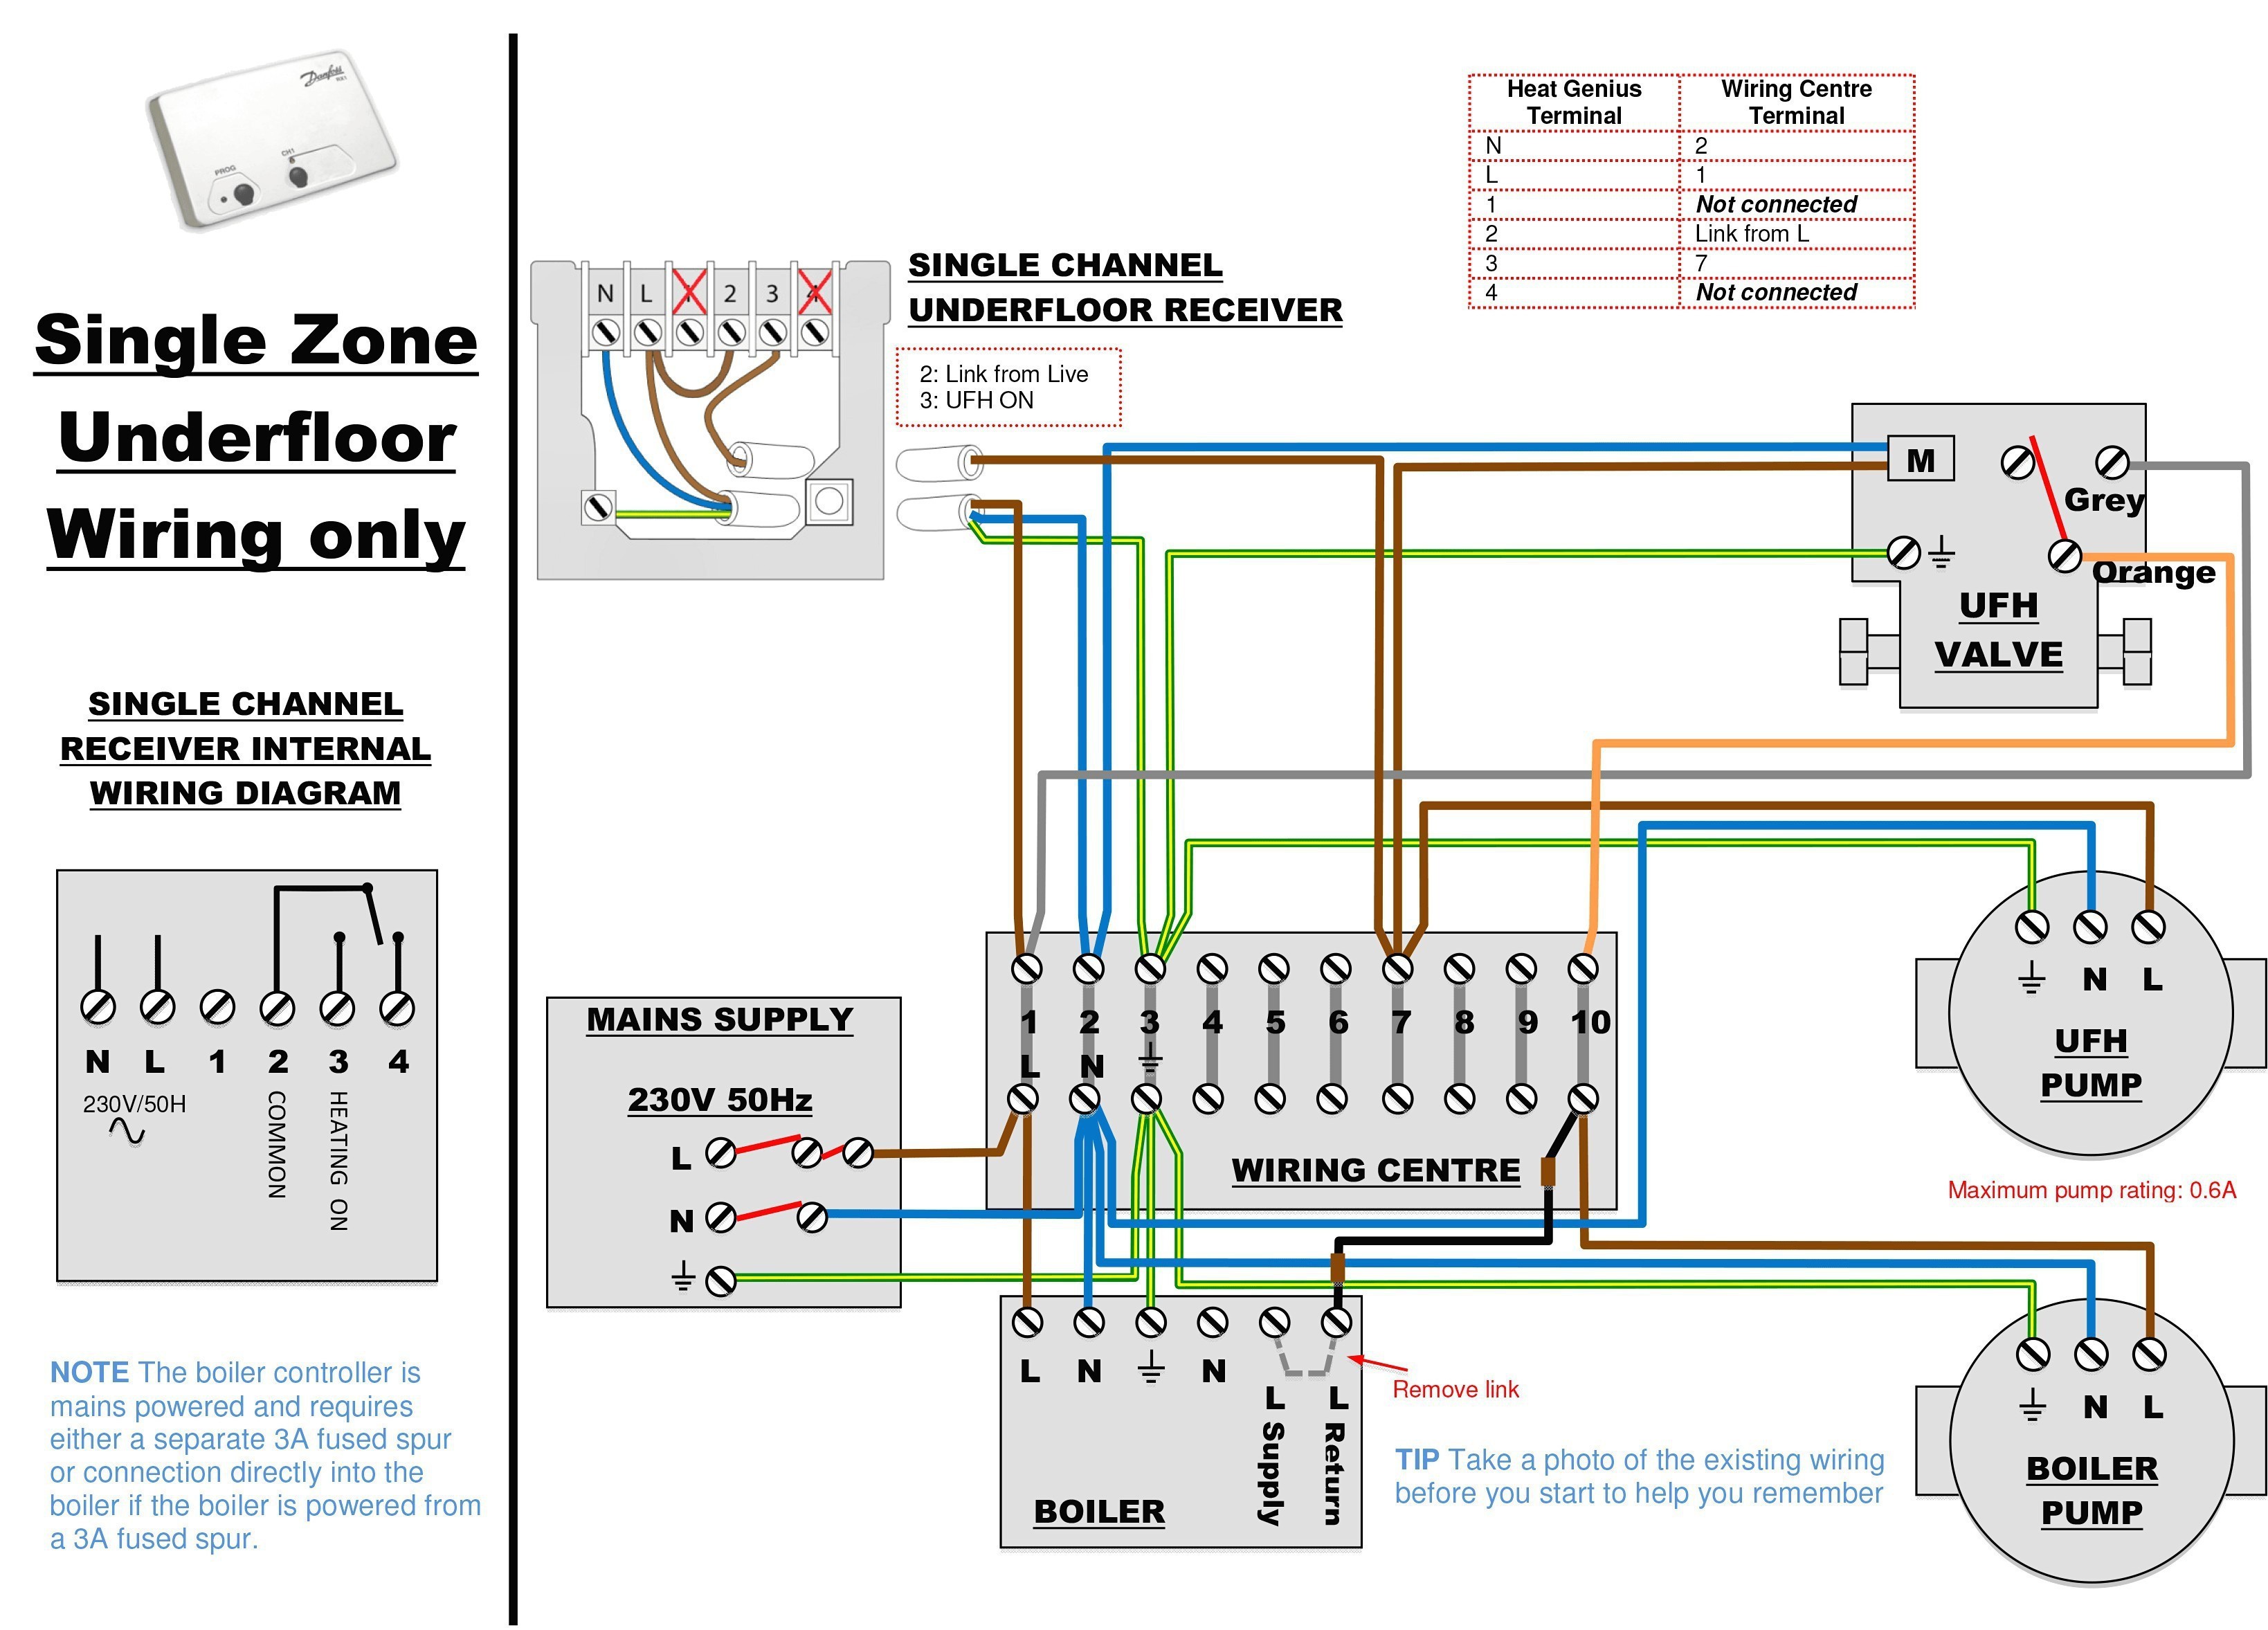 3 Phase Immersion Heater Wiring Diagram Reference Immersion Heater Element Wiring Diagram New Wiring Diagram For Water